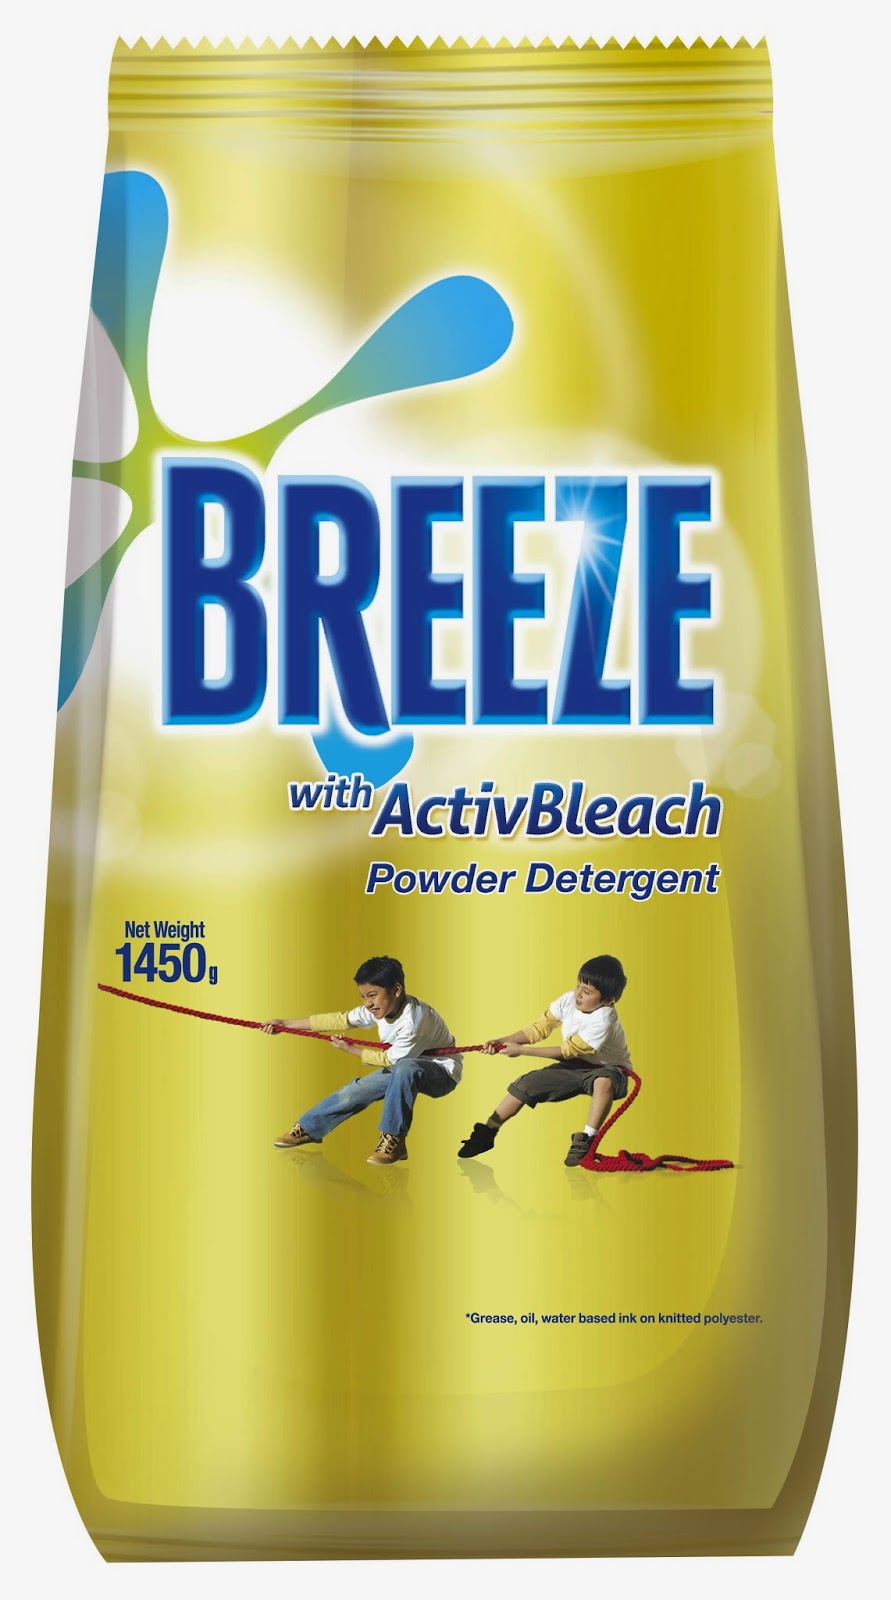 Breeze ActivBleach calls on moms to join 1Laba Day